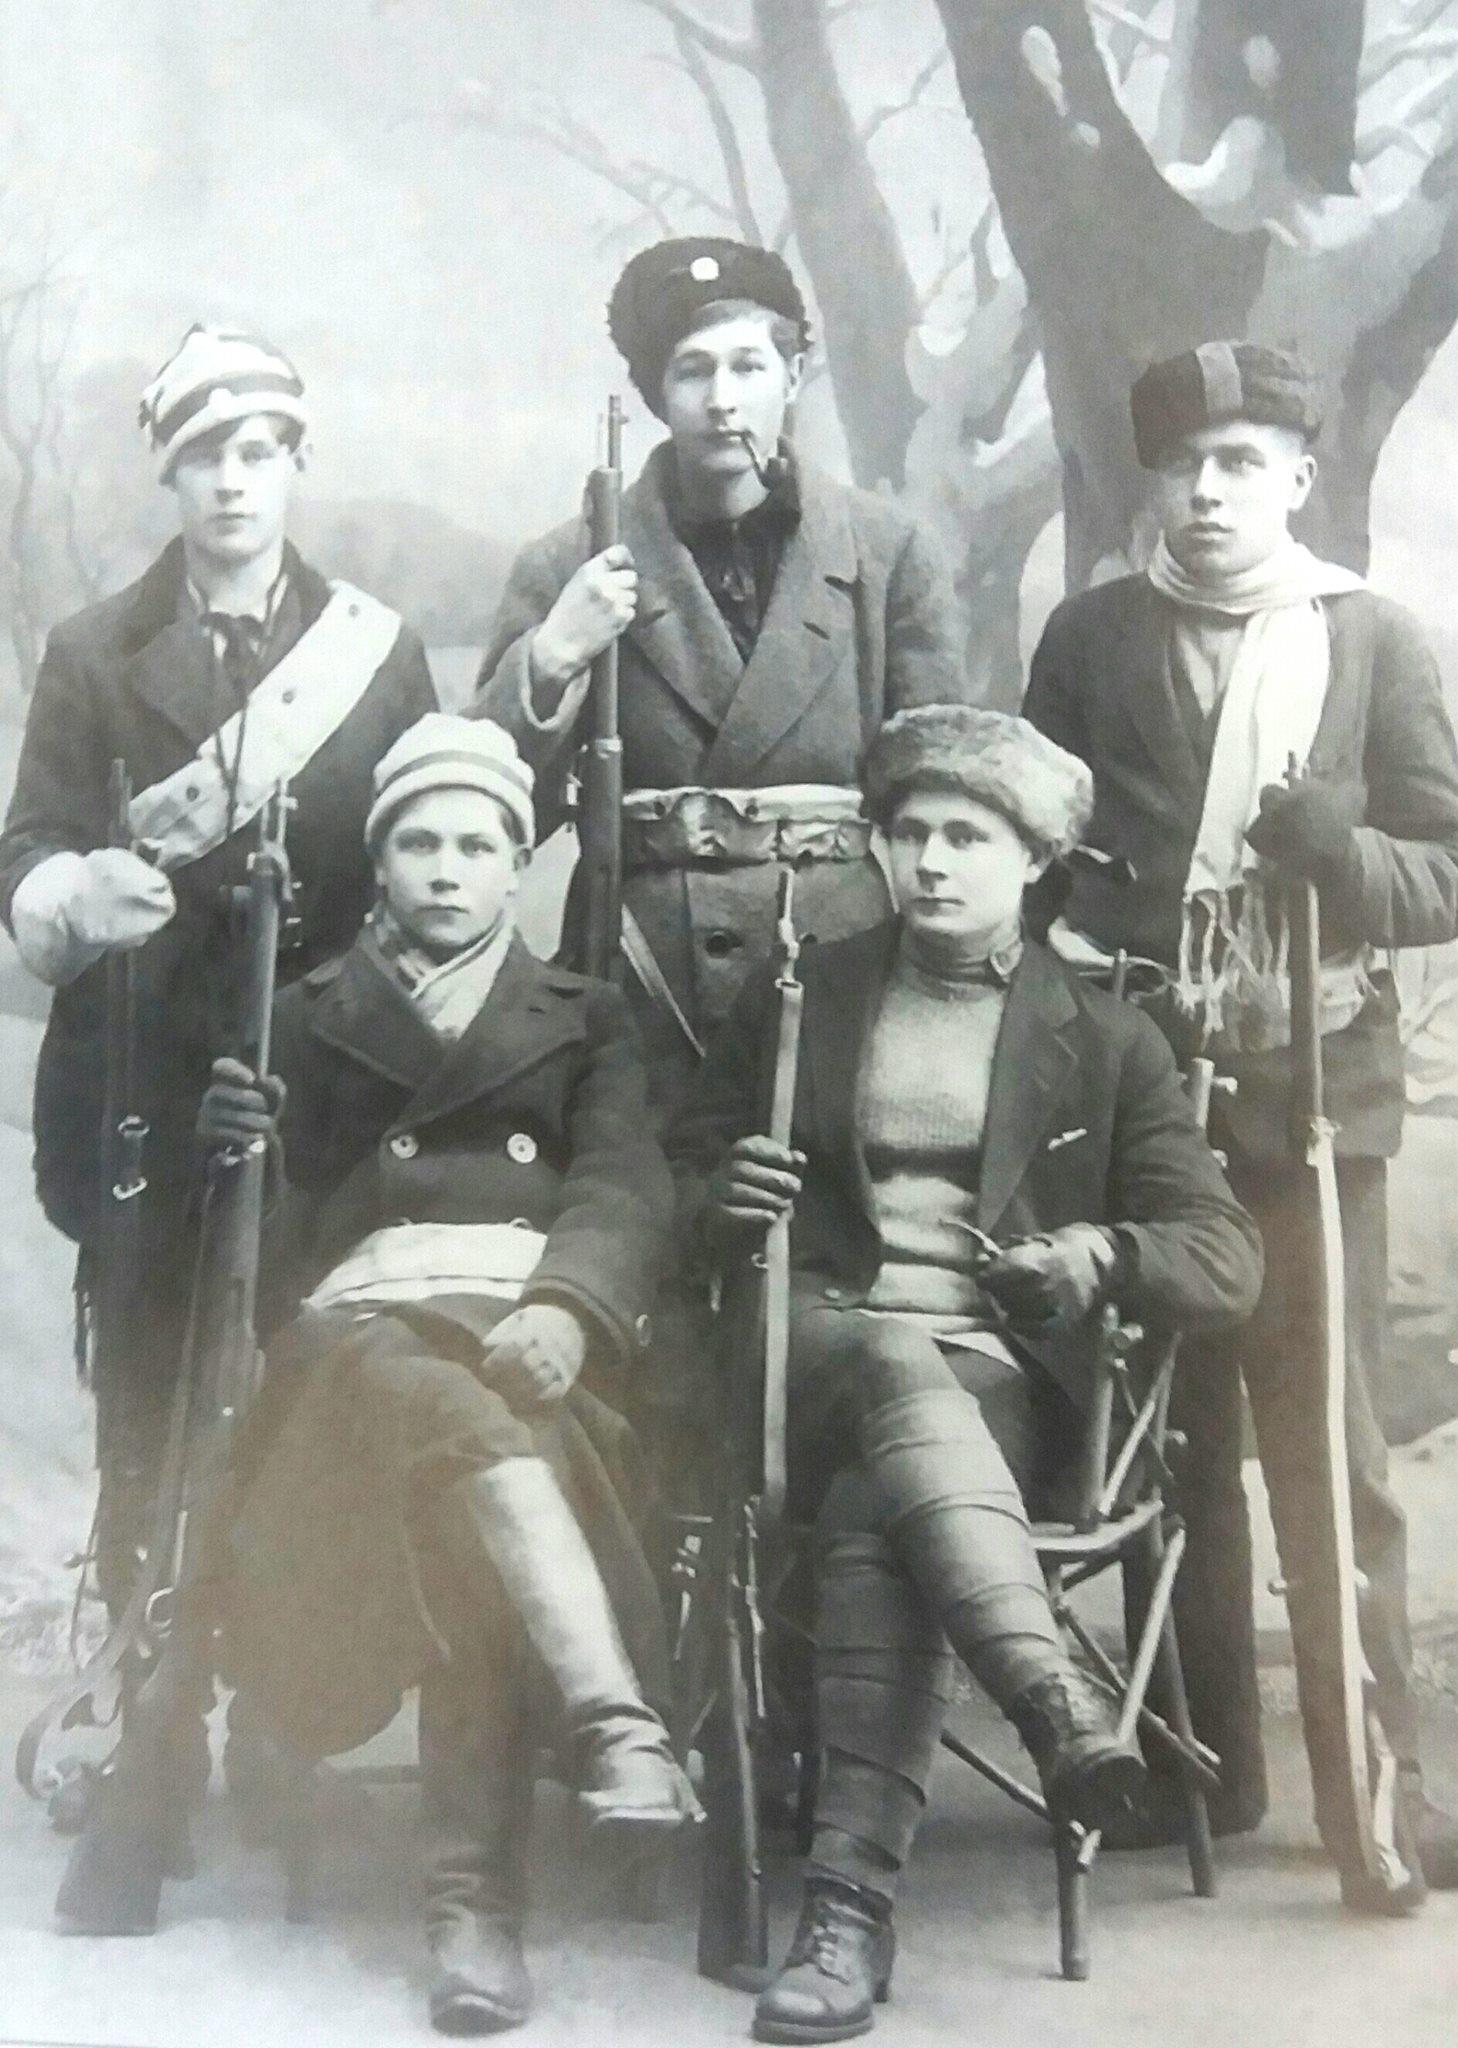 Finnish red guard militia members posing for the camera some time during the civil war.